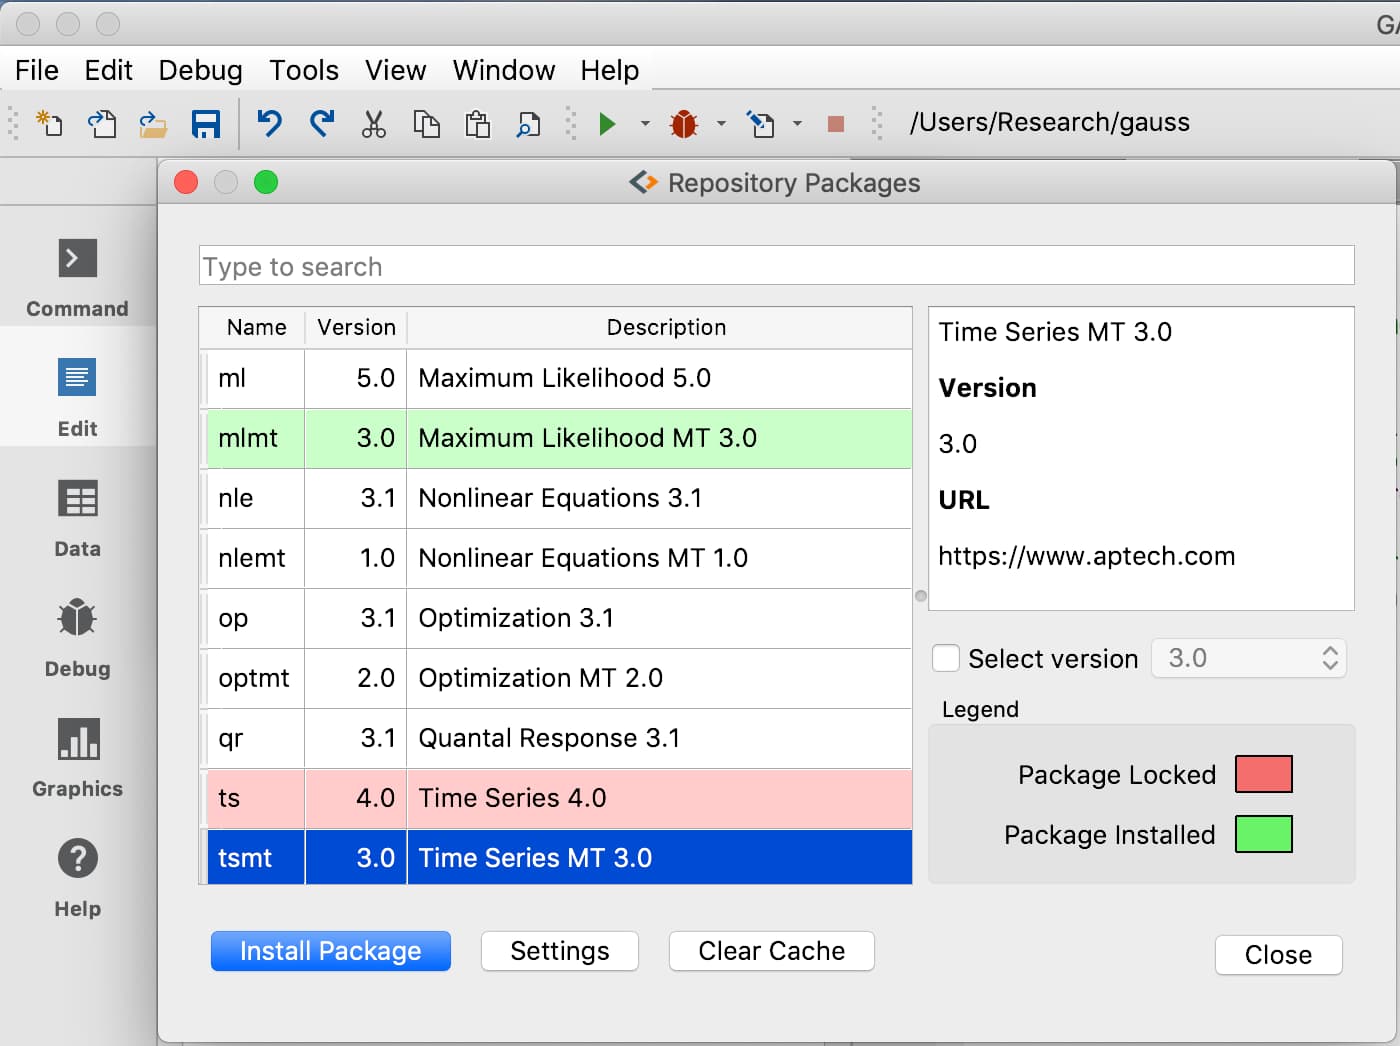 GAUSS 20: Download and install packages in one step